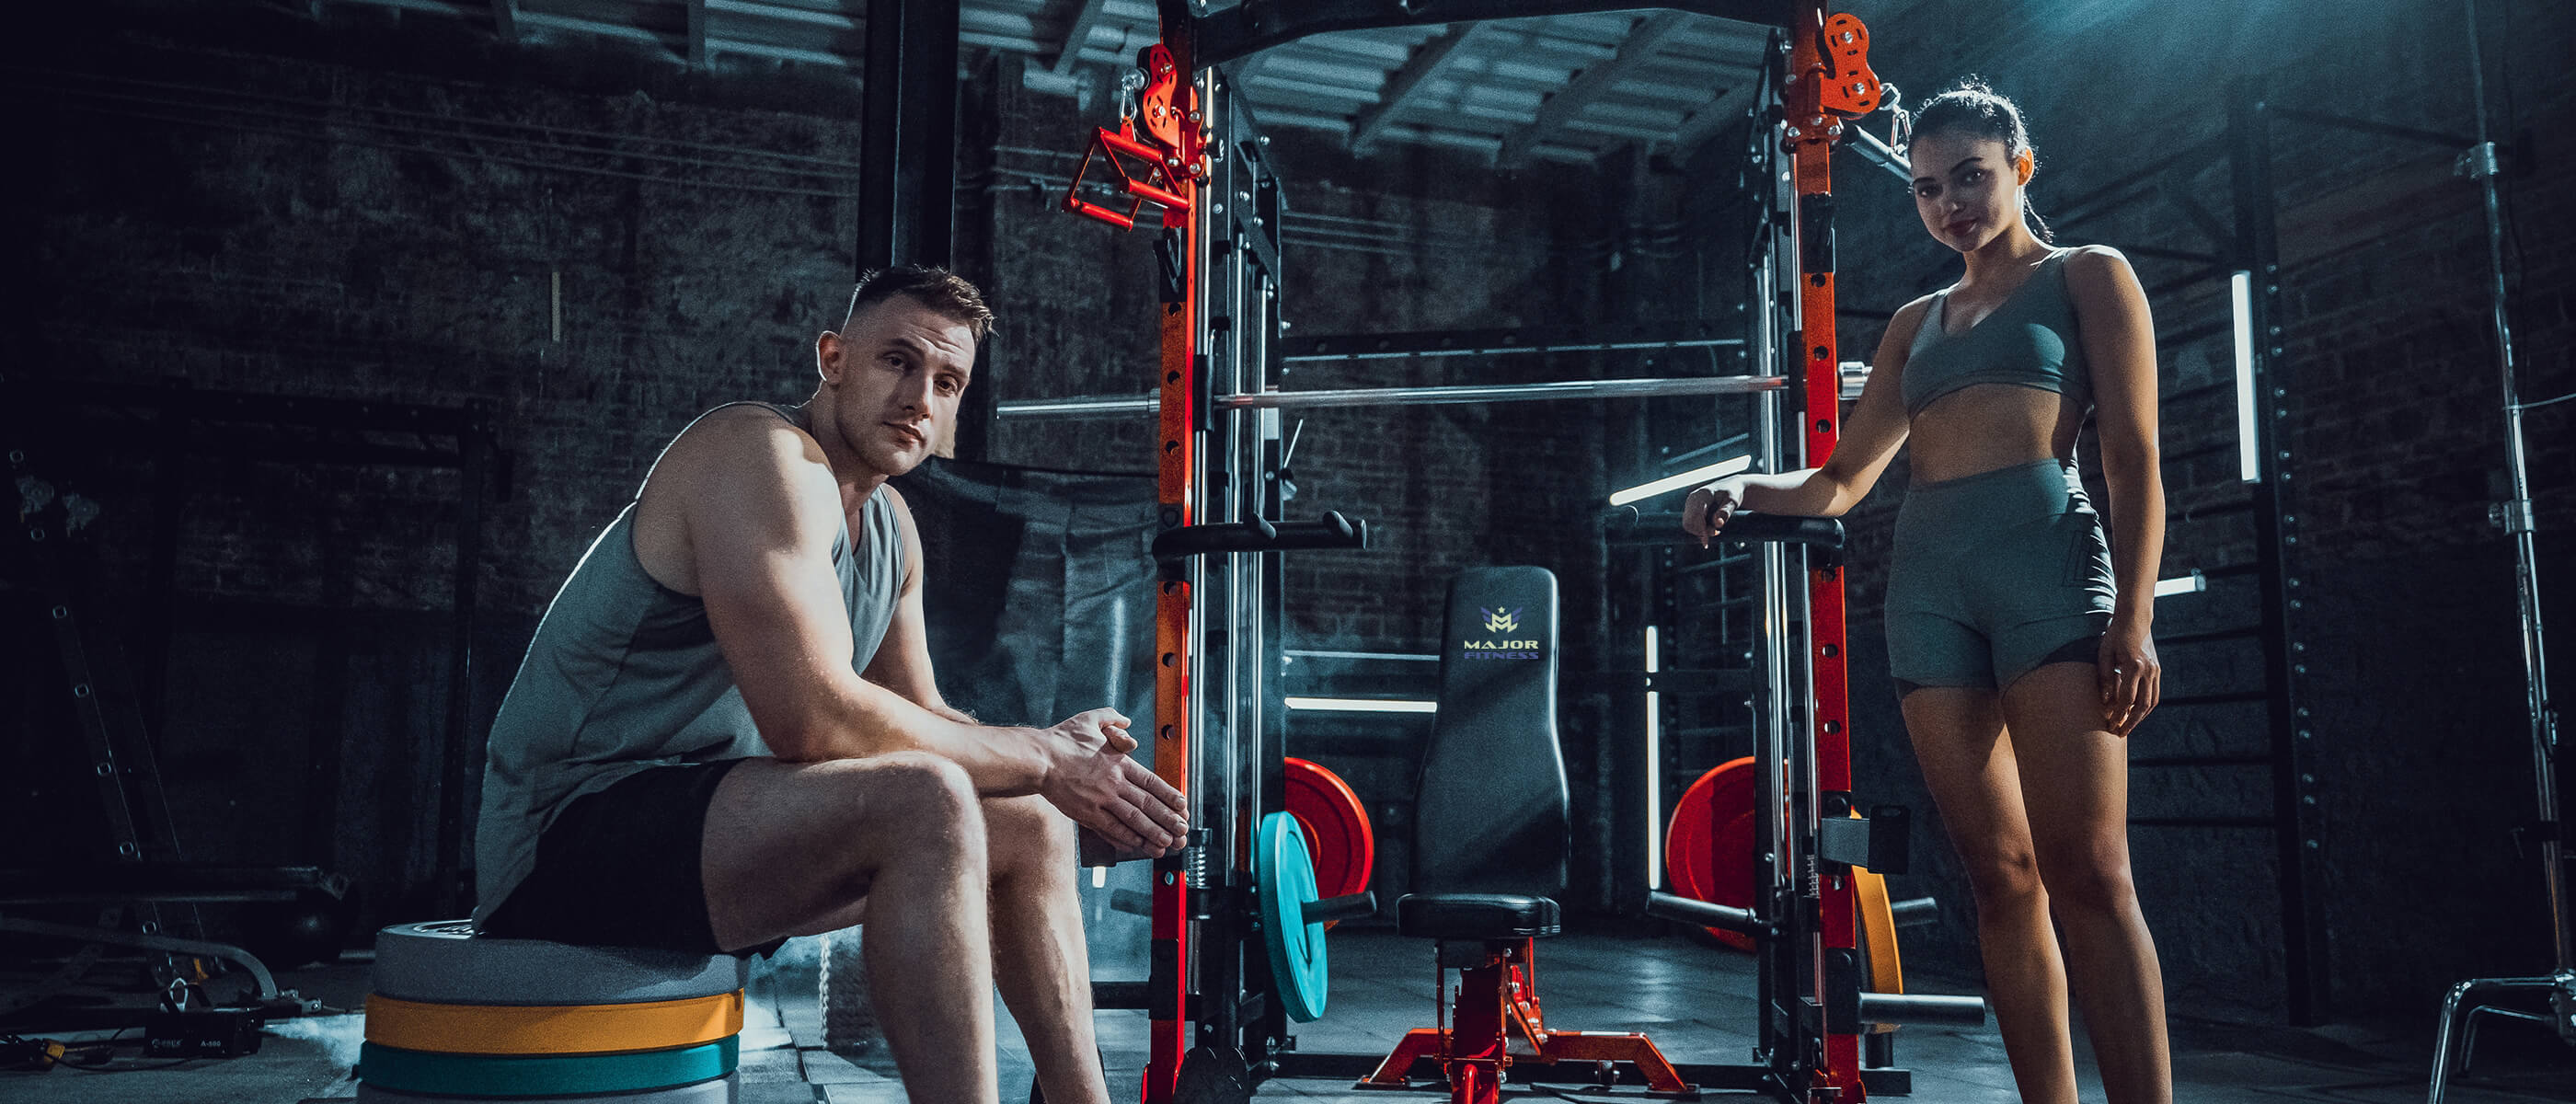 Focused man and woman in athletic gear training in a rustic brick-walled home gym, featuring a Major Fitness power rack.